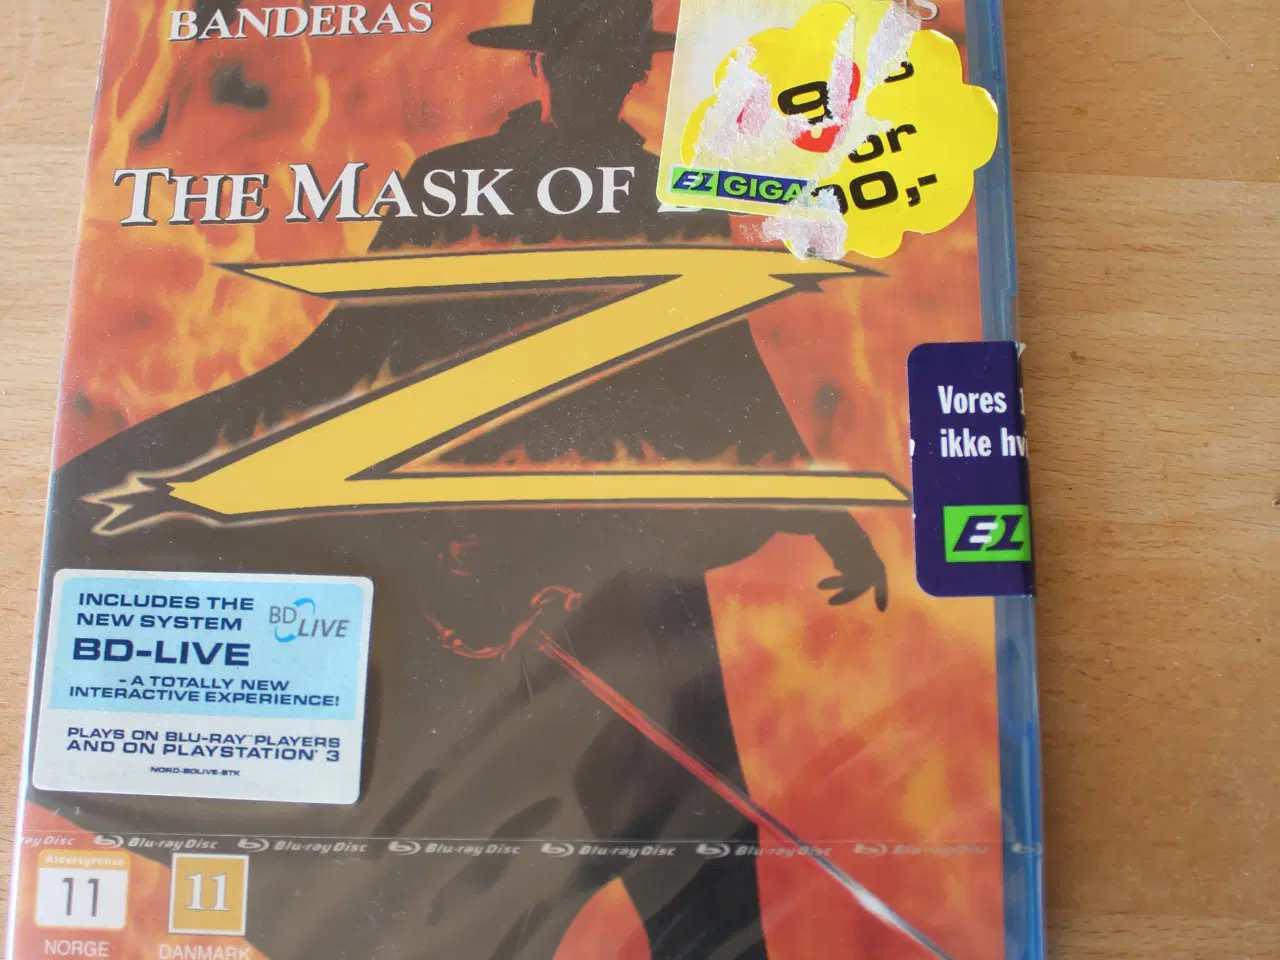 Billede 1 - The Mask of Zorro, Blu-ray, action